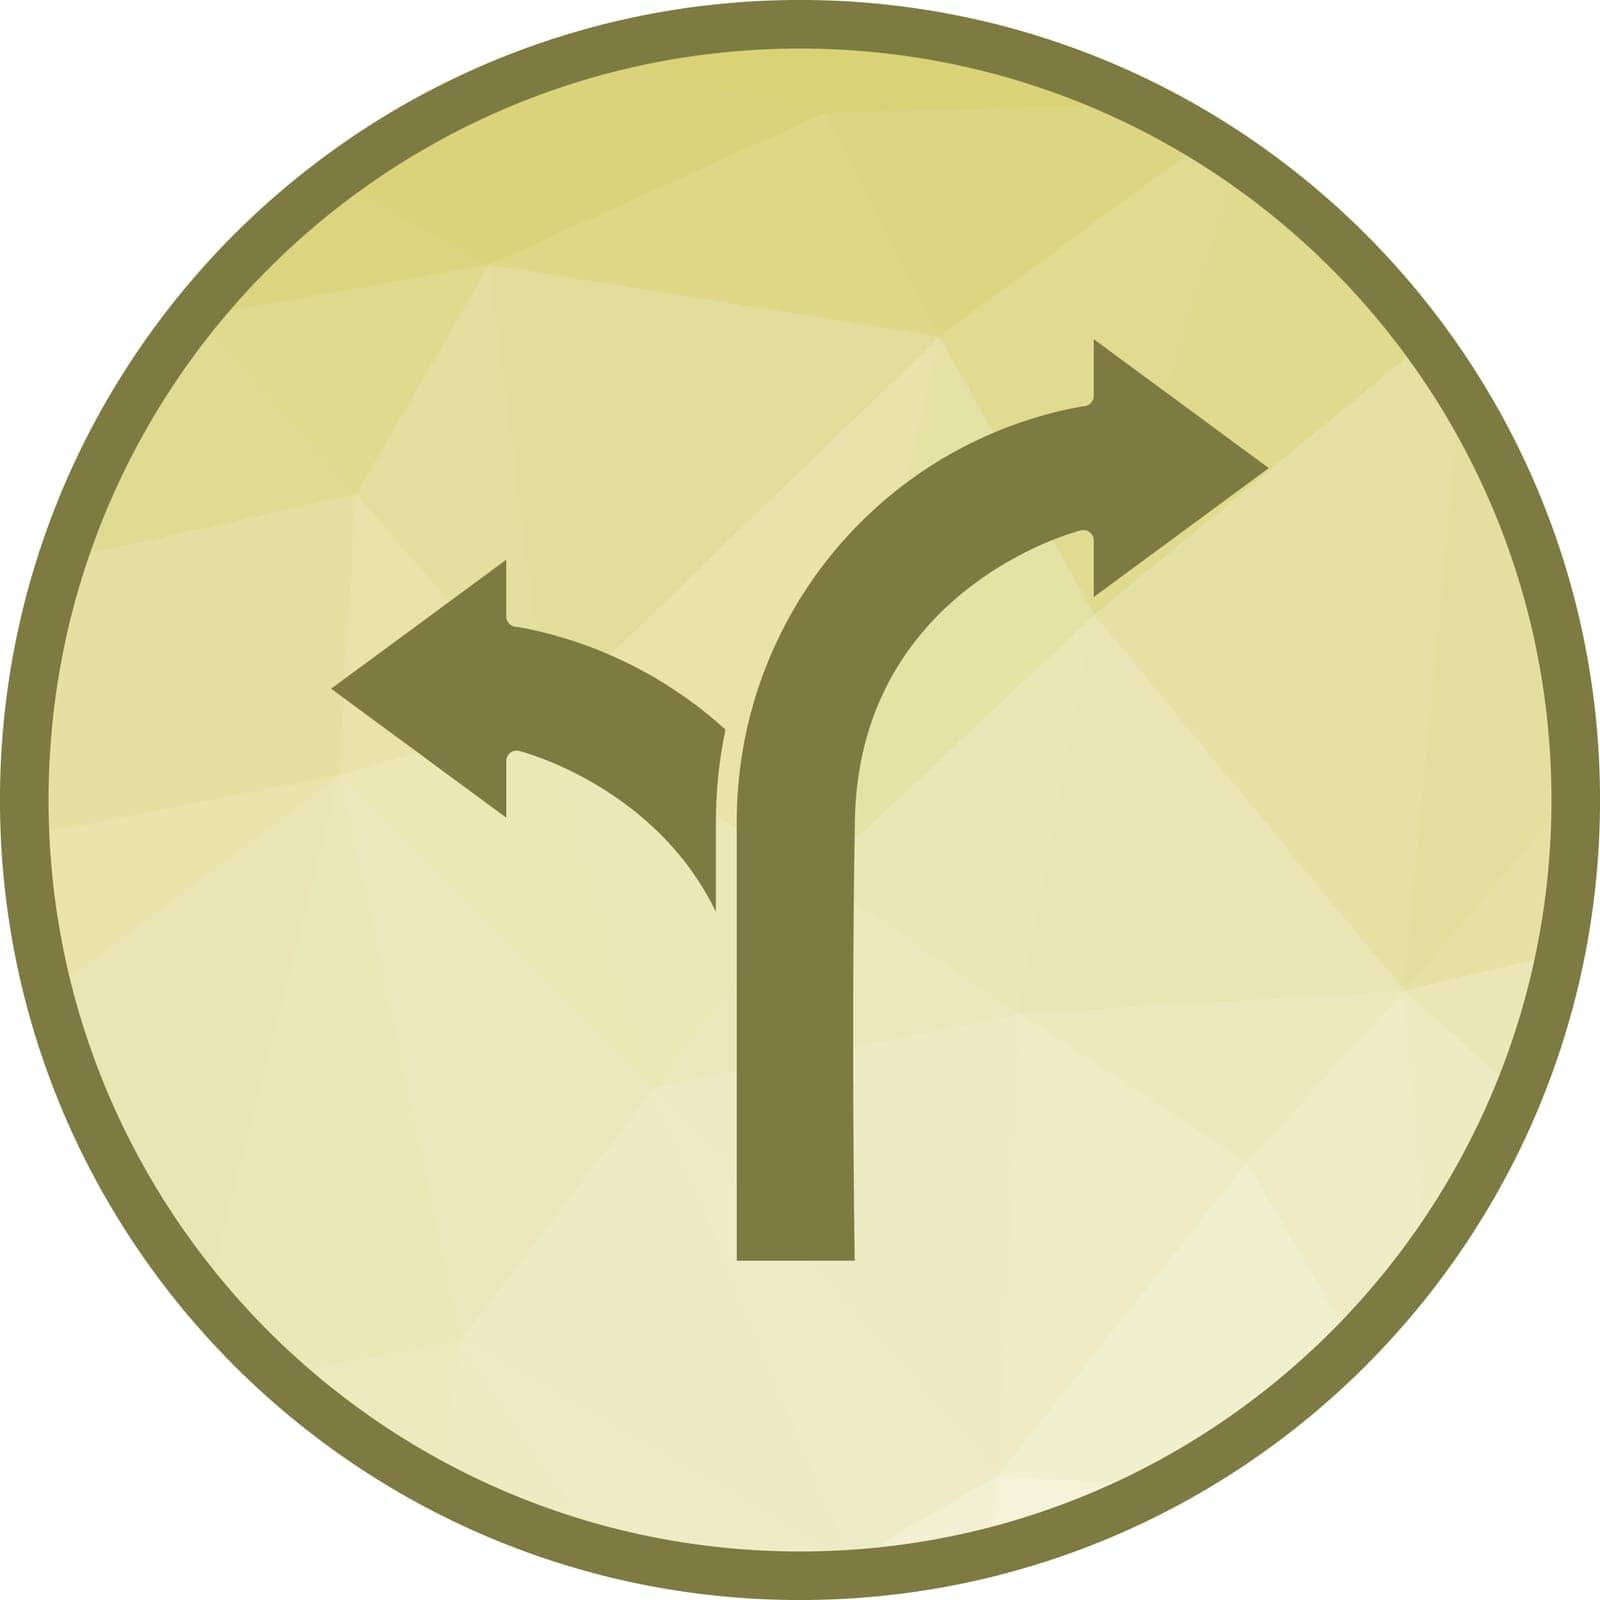 Business Path icon vector image. Suitable for mobile application web application and print media.